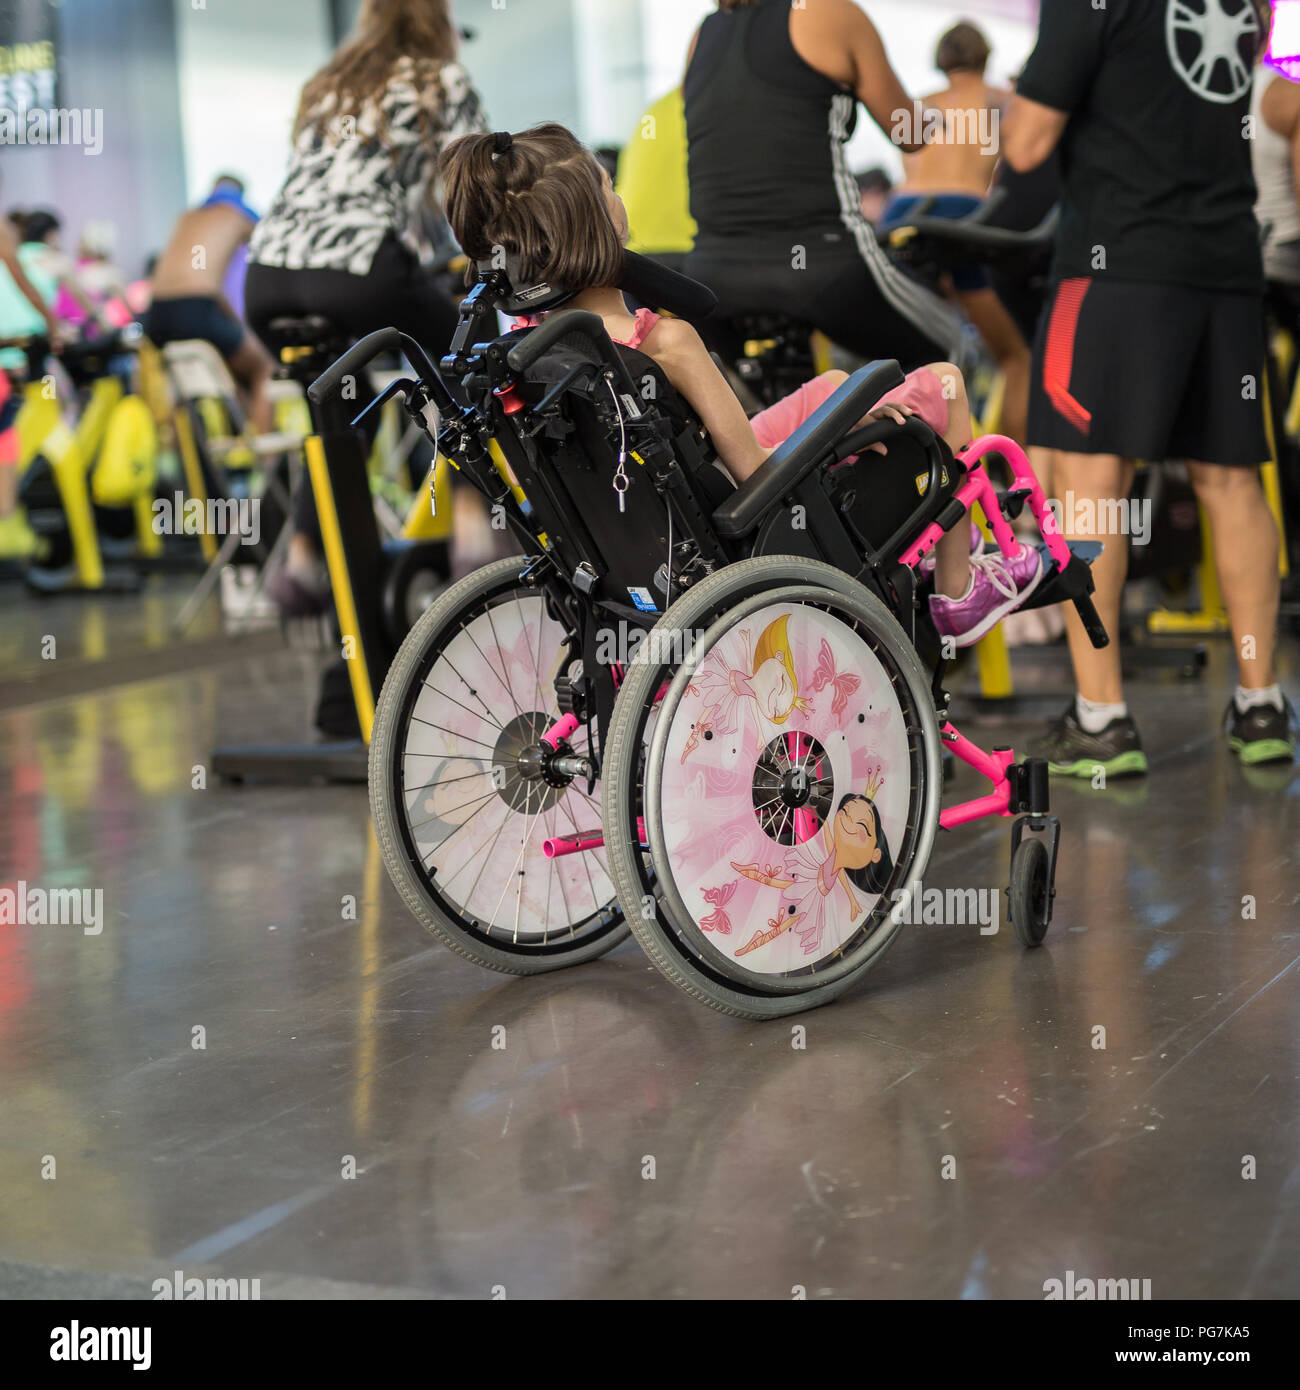 Girl in Pink Wheelchair attending a Fitness Workout with Spinning Bike  Stock Photo - Alamy